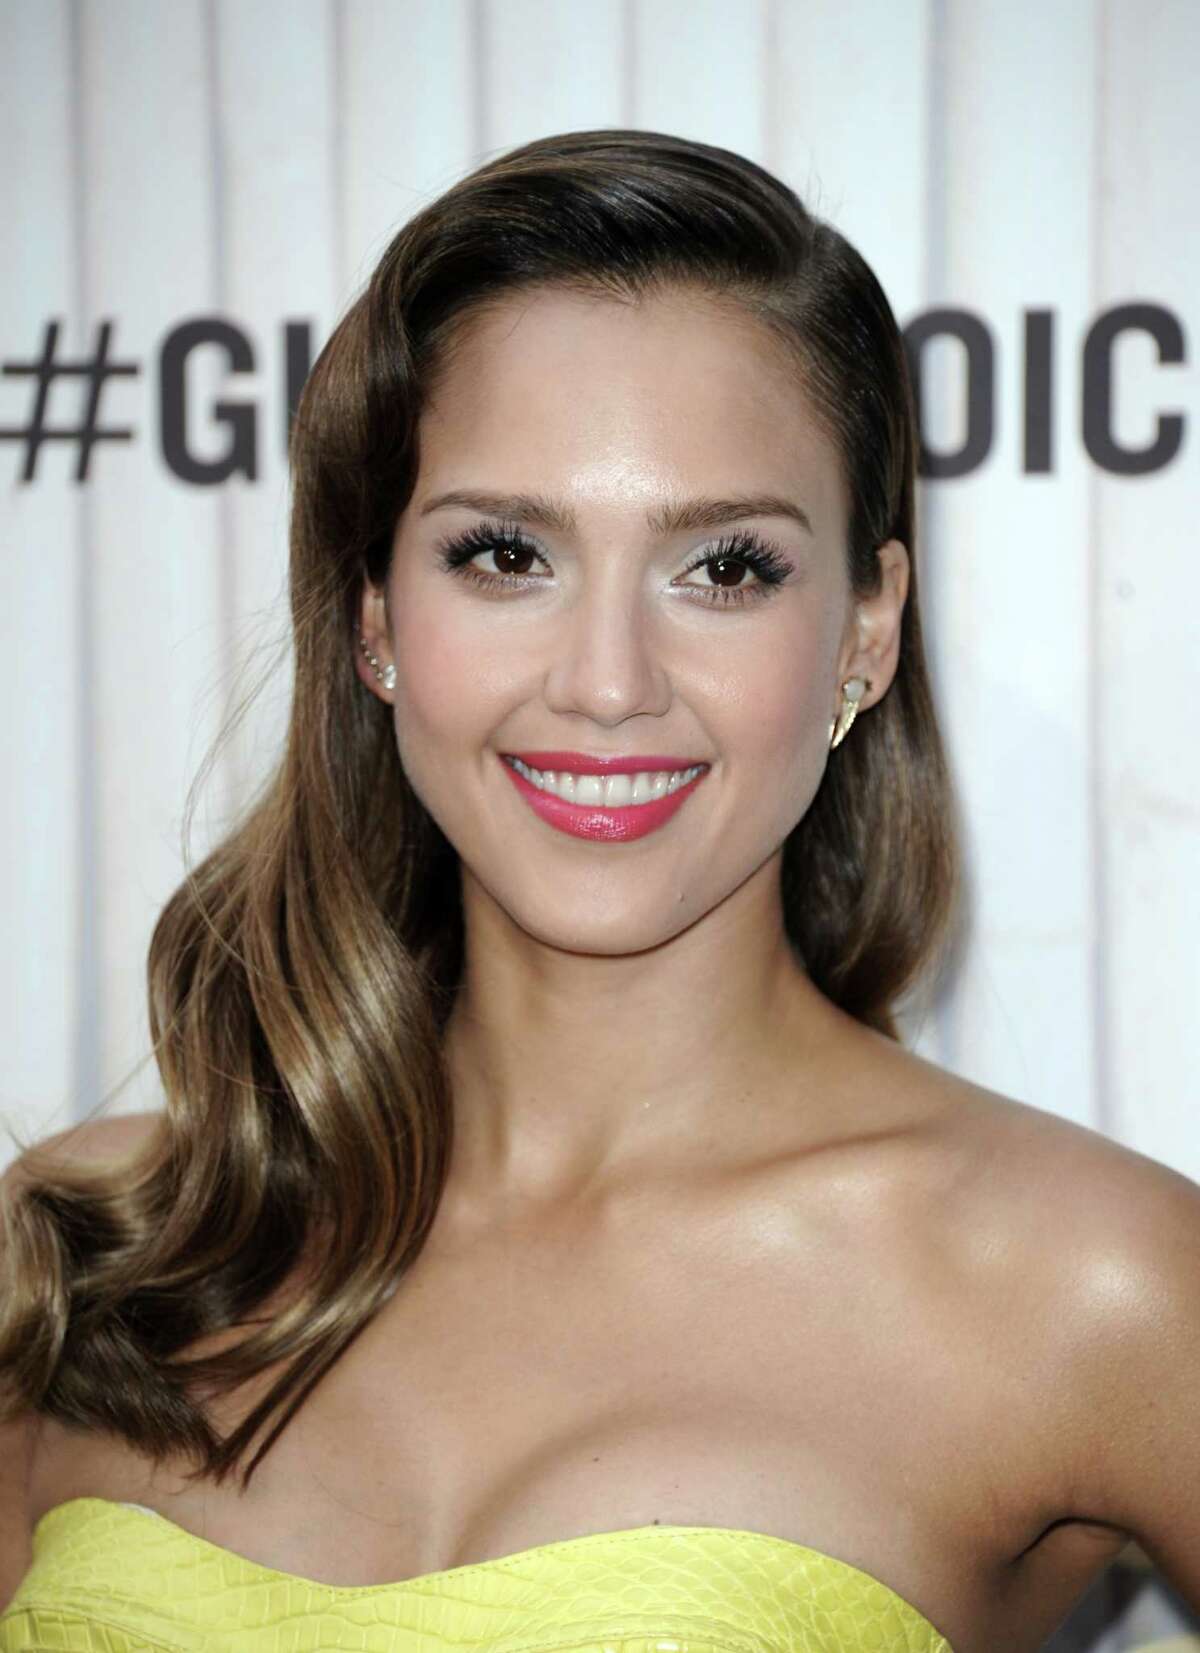 Jessica Alba arrives at Spike TV's Guys Choice Awards at Sony Pictures Studios on Saturday, June 8, 2013, in Culver City, Calif. (Photo by Richard Shotwell/Invision/AP)